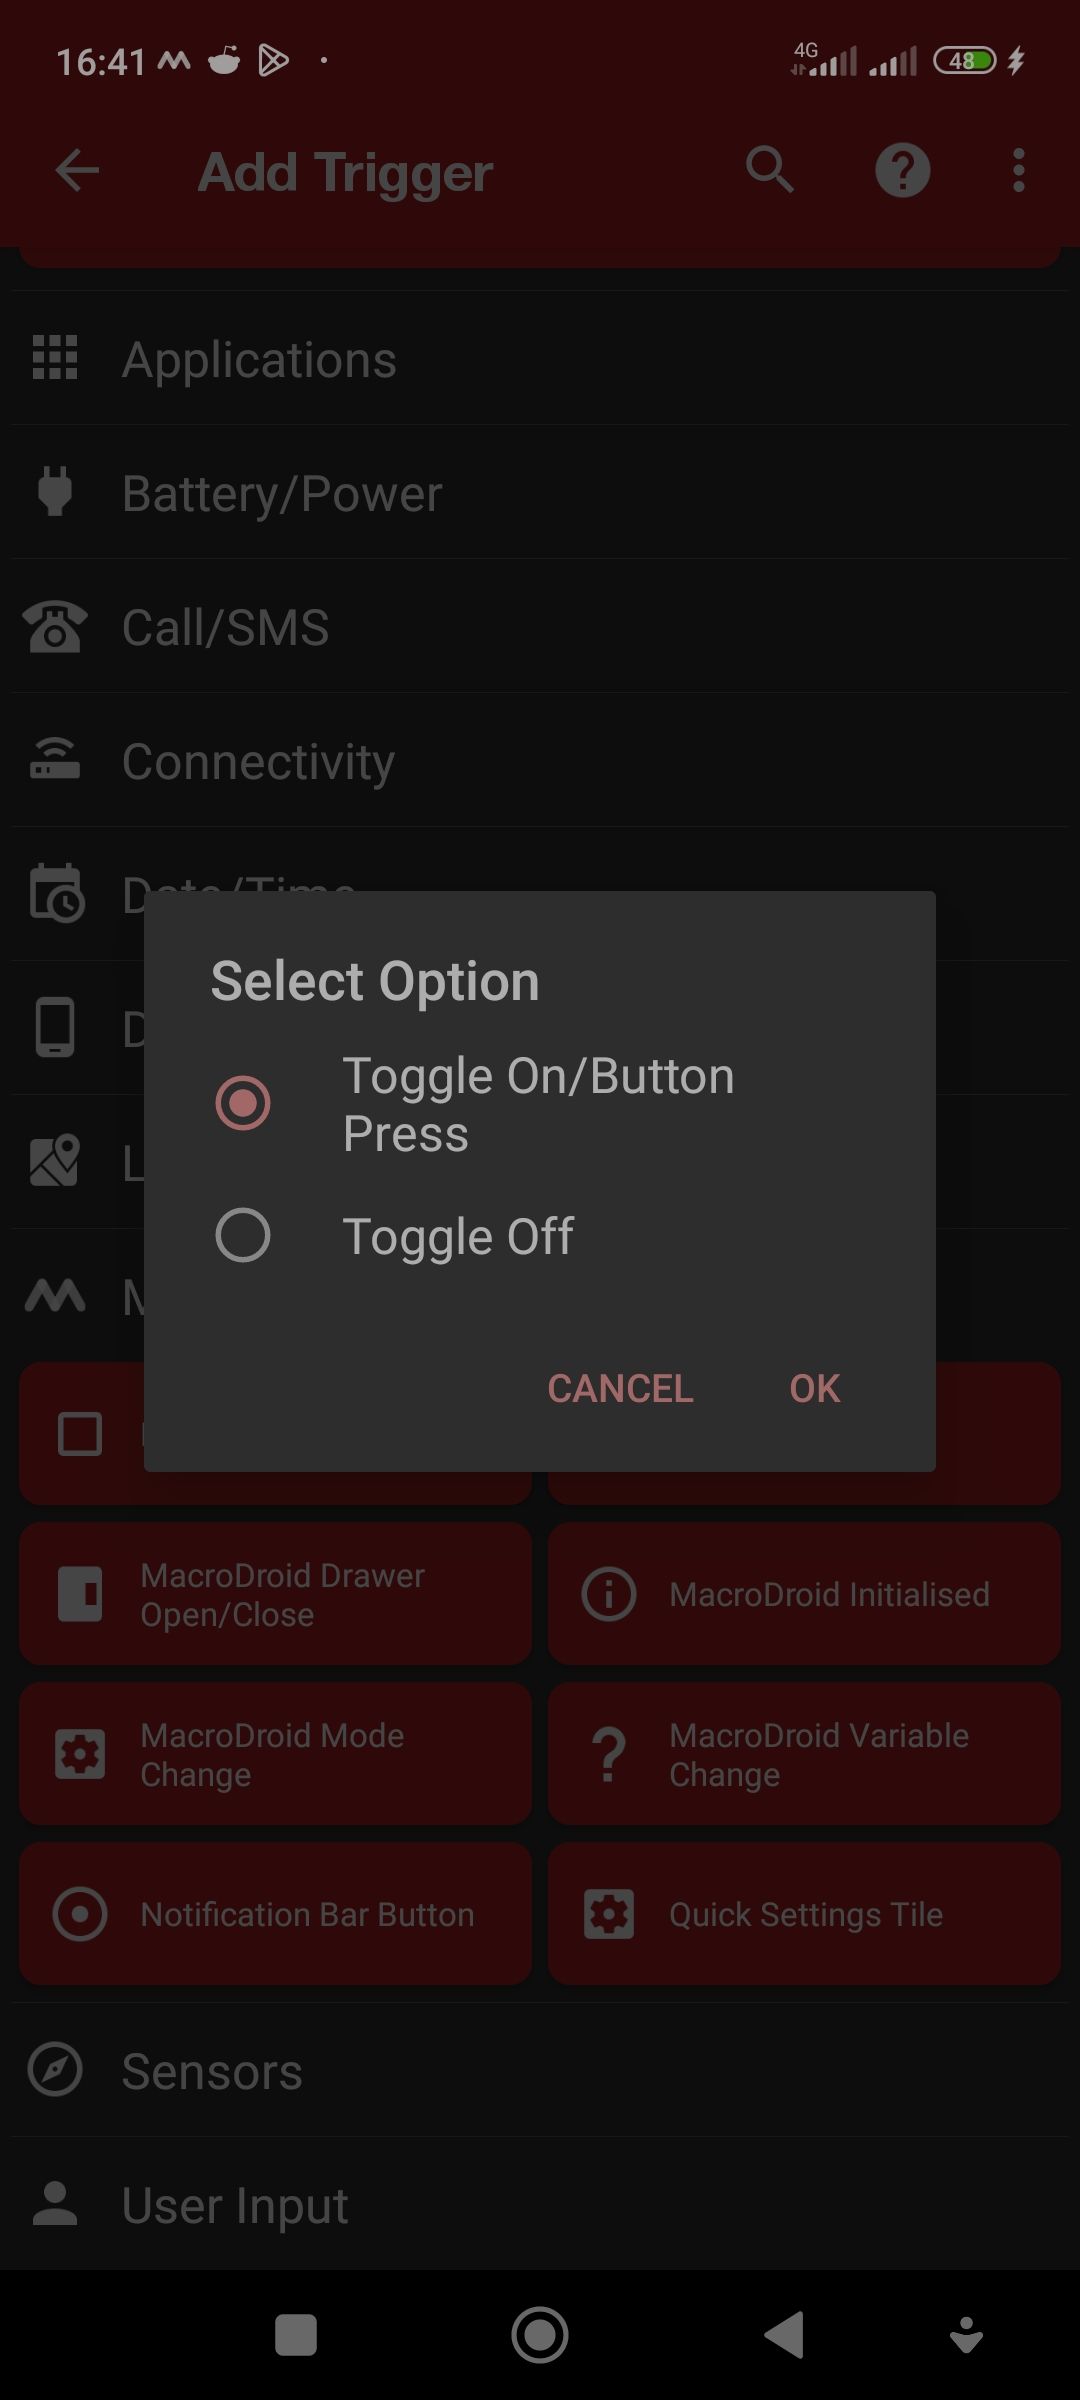 Add quick settings tiles as trigger in MacroDroid